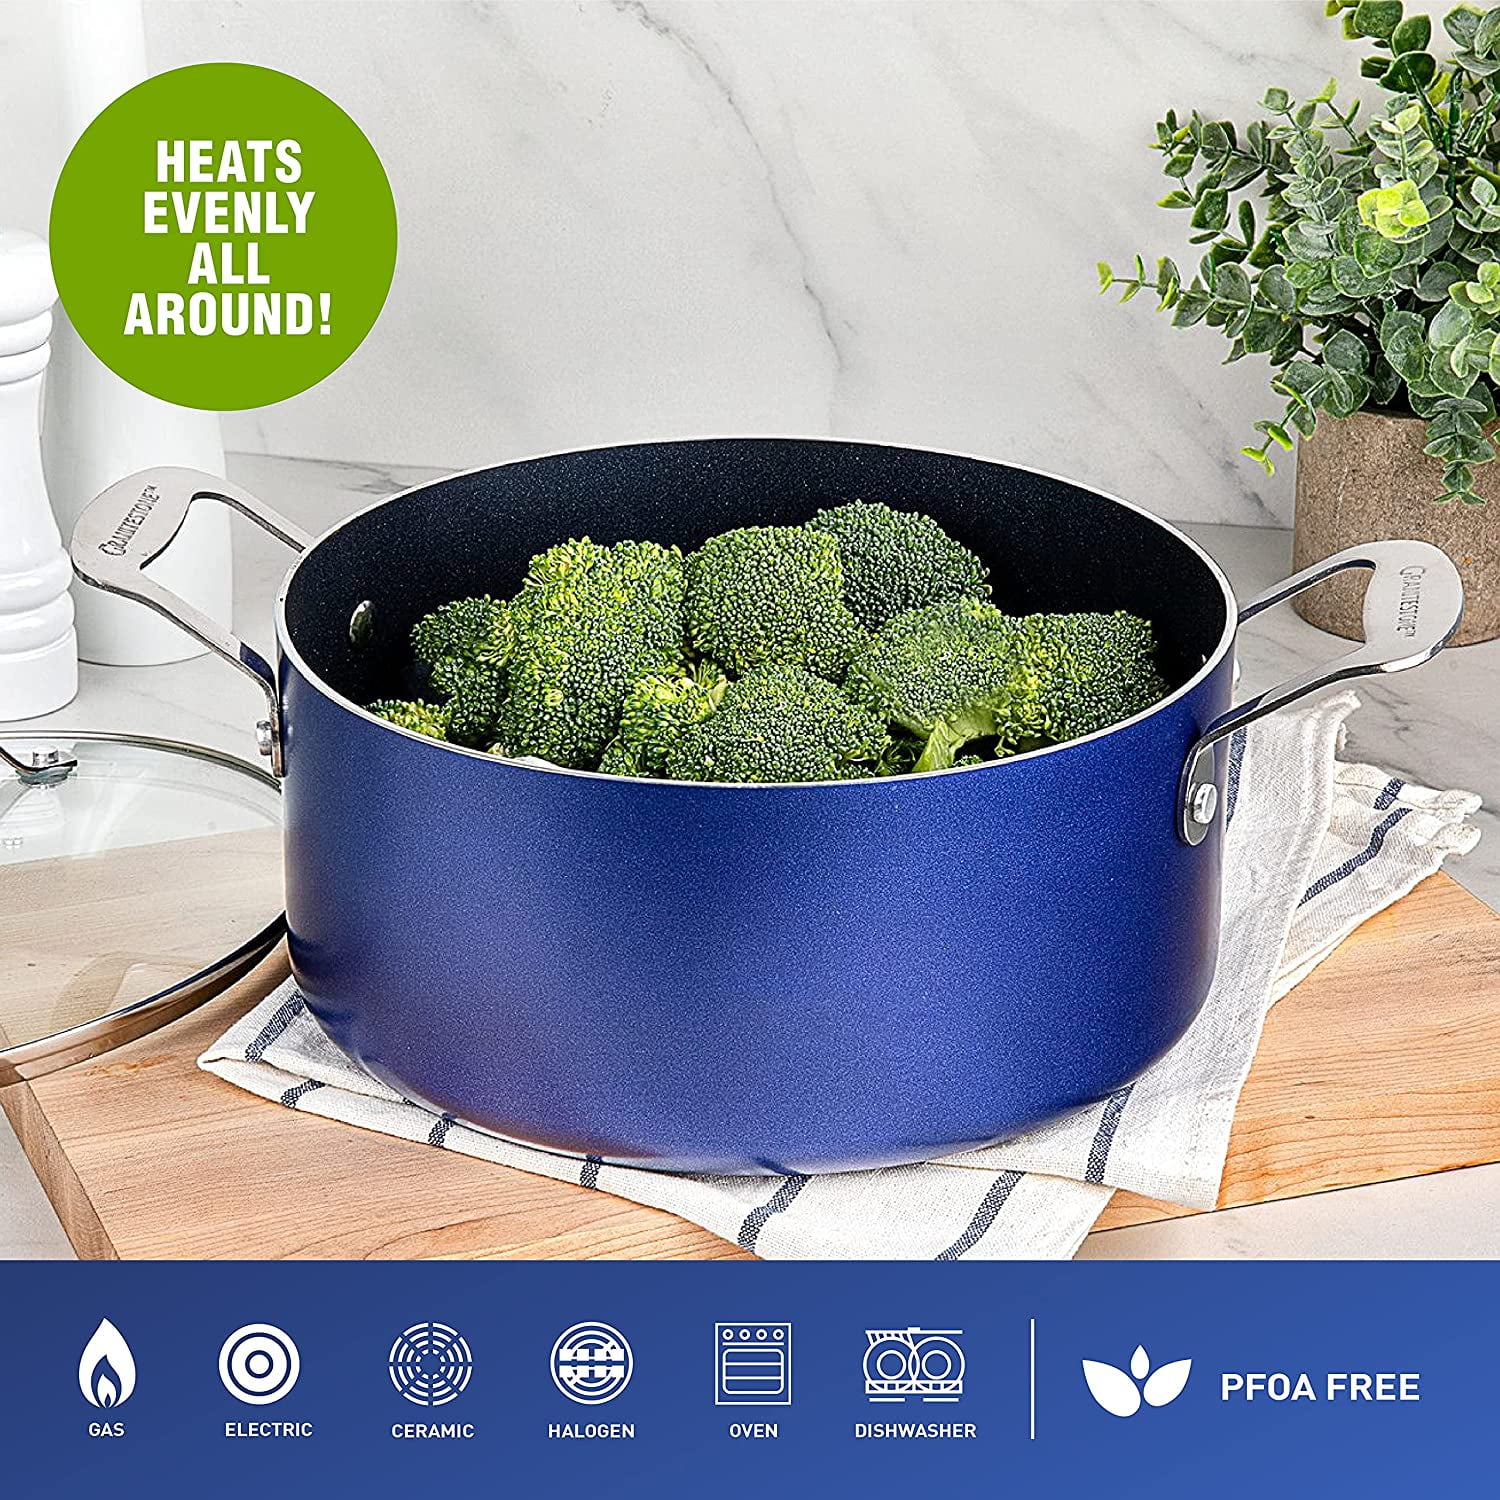 Granitestone Blue 2.5 QT Nonstick Sauce Pan with Tempered Glass Lid, Oven &  Dishwasher Safe & Reviews